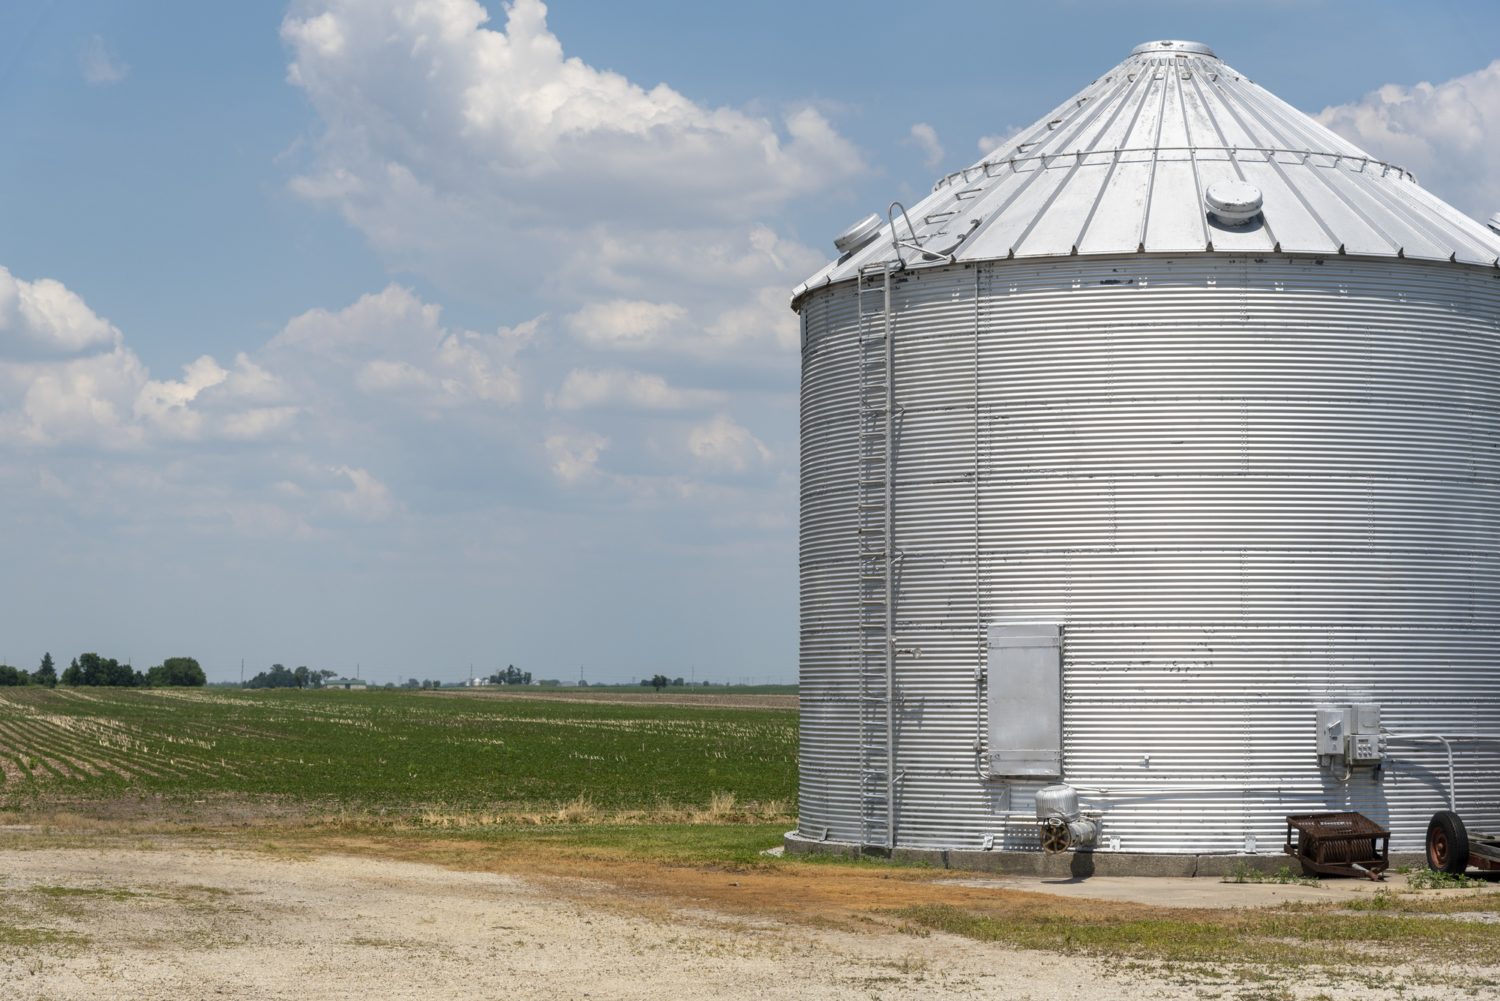 The farm of Greg St. Albin near Manteno, IL. A large silver silo sits next to an open field of tilled grass. July 2020